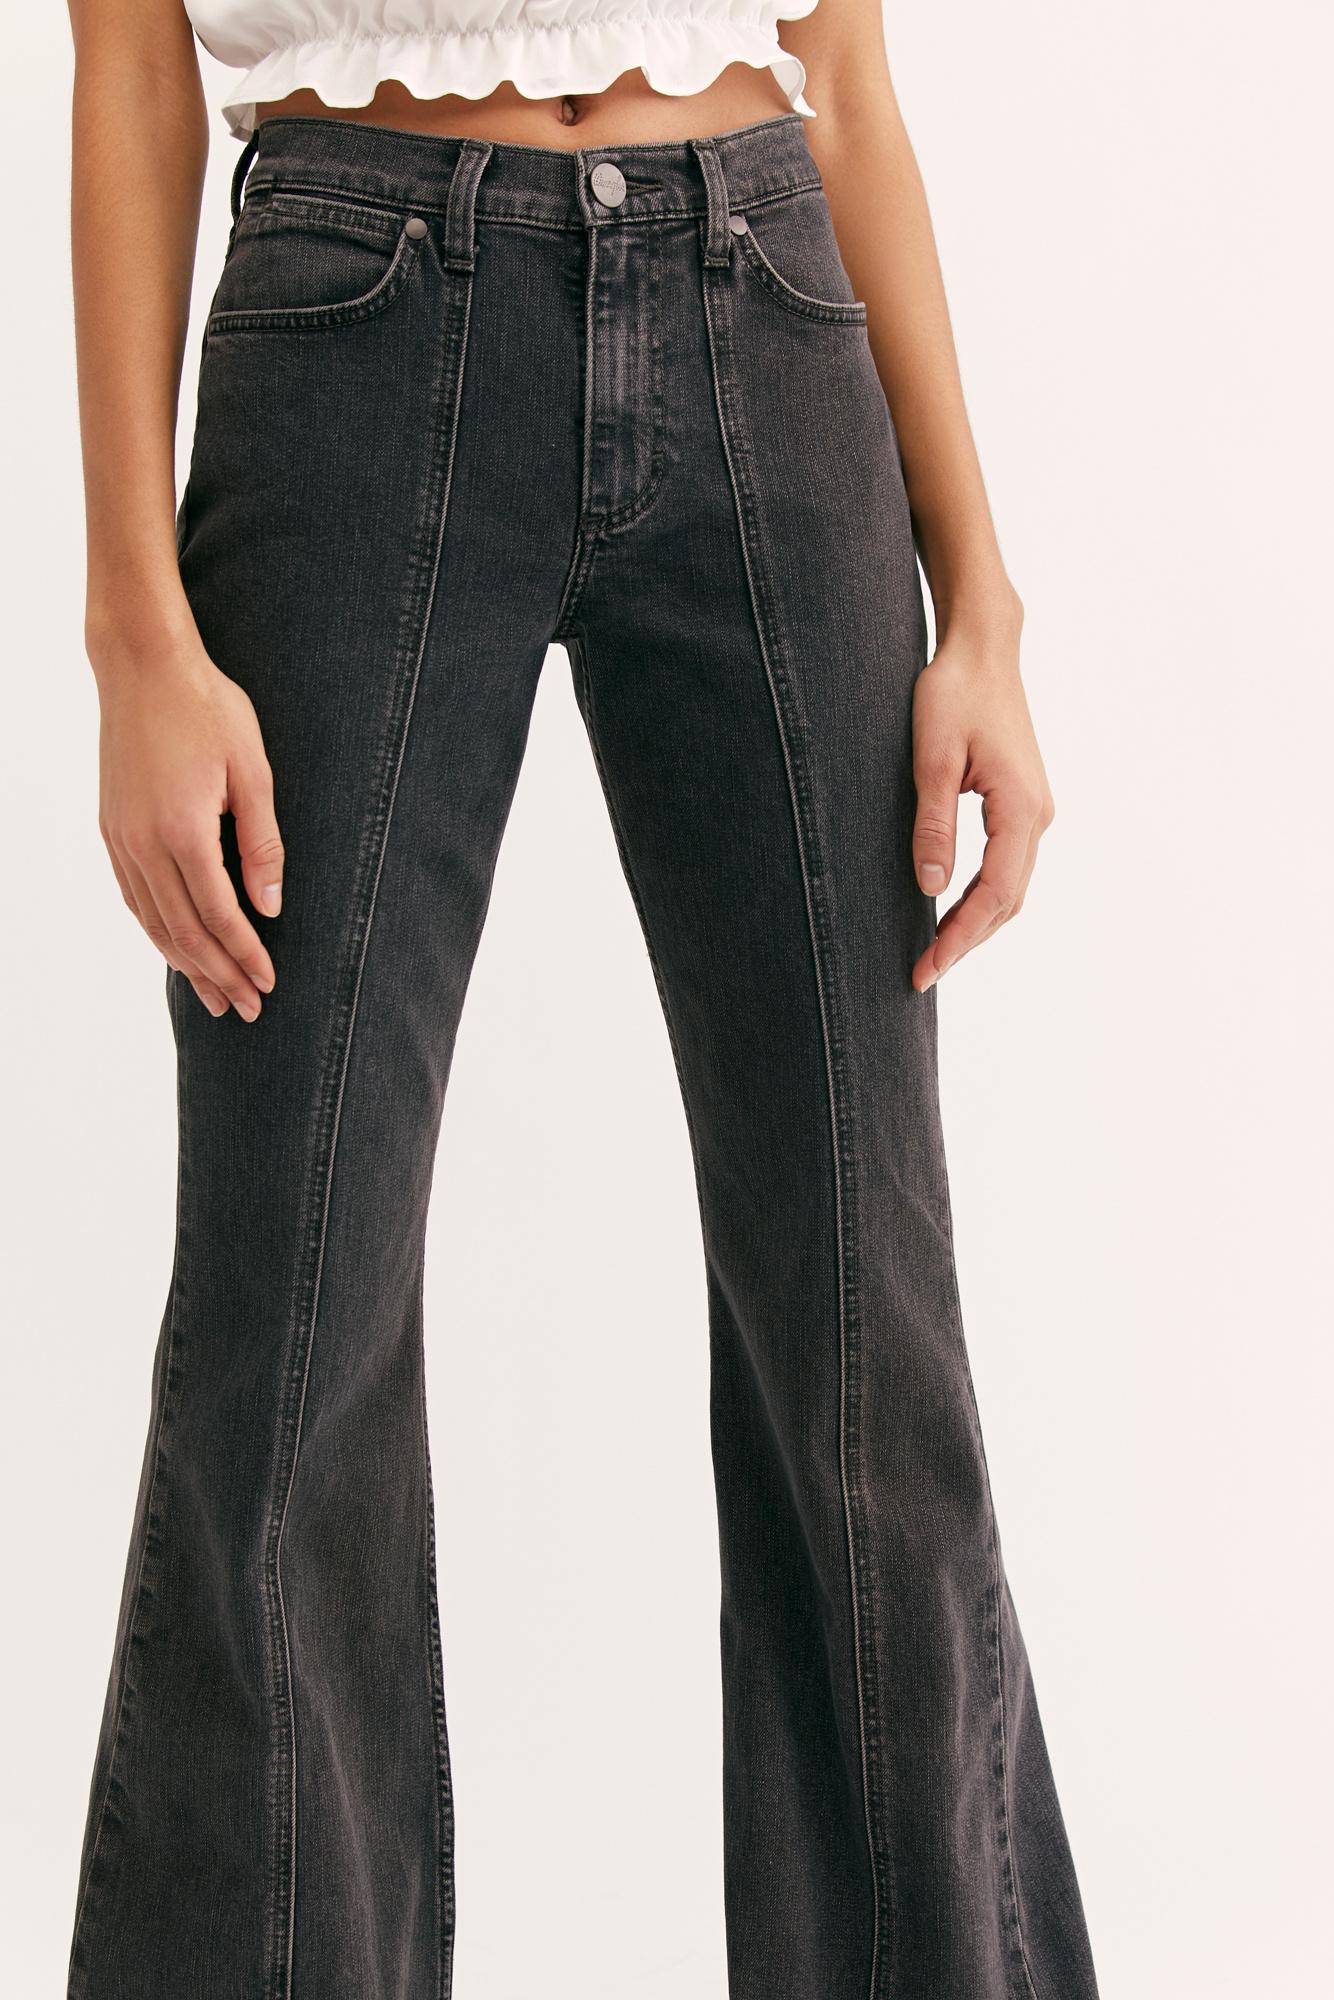 Free People Wrangler Seamed Flare Jeans in Gray | Lyst